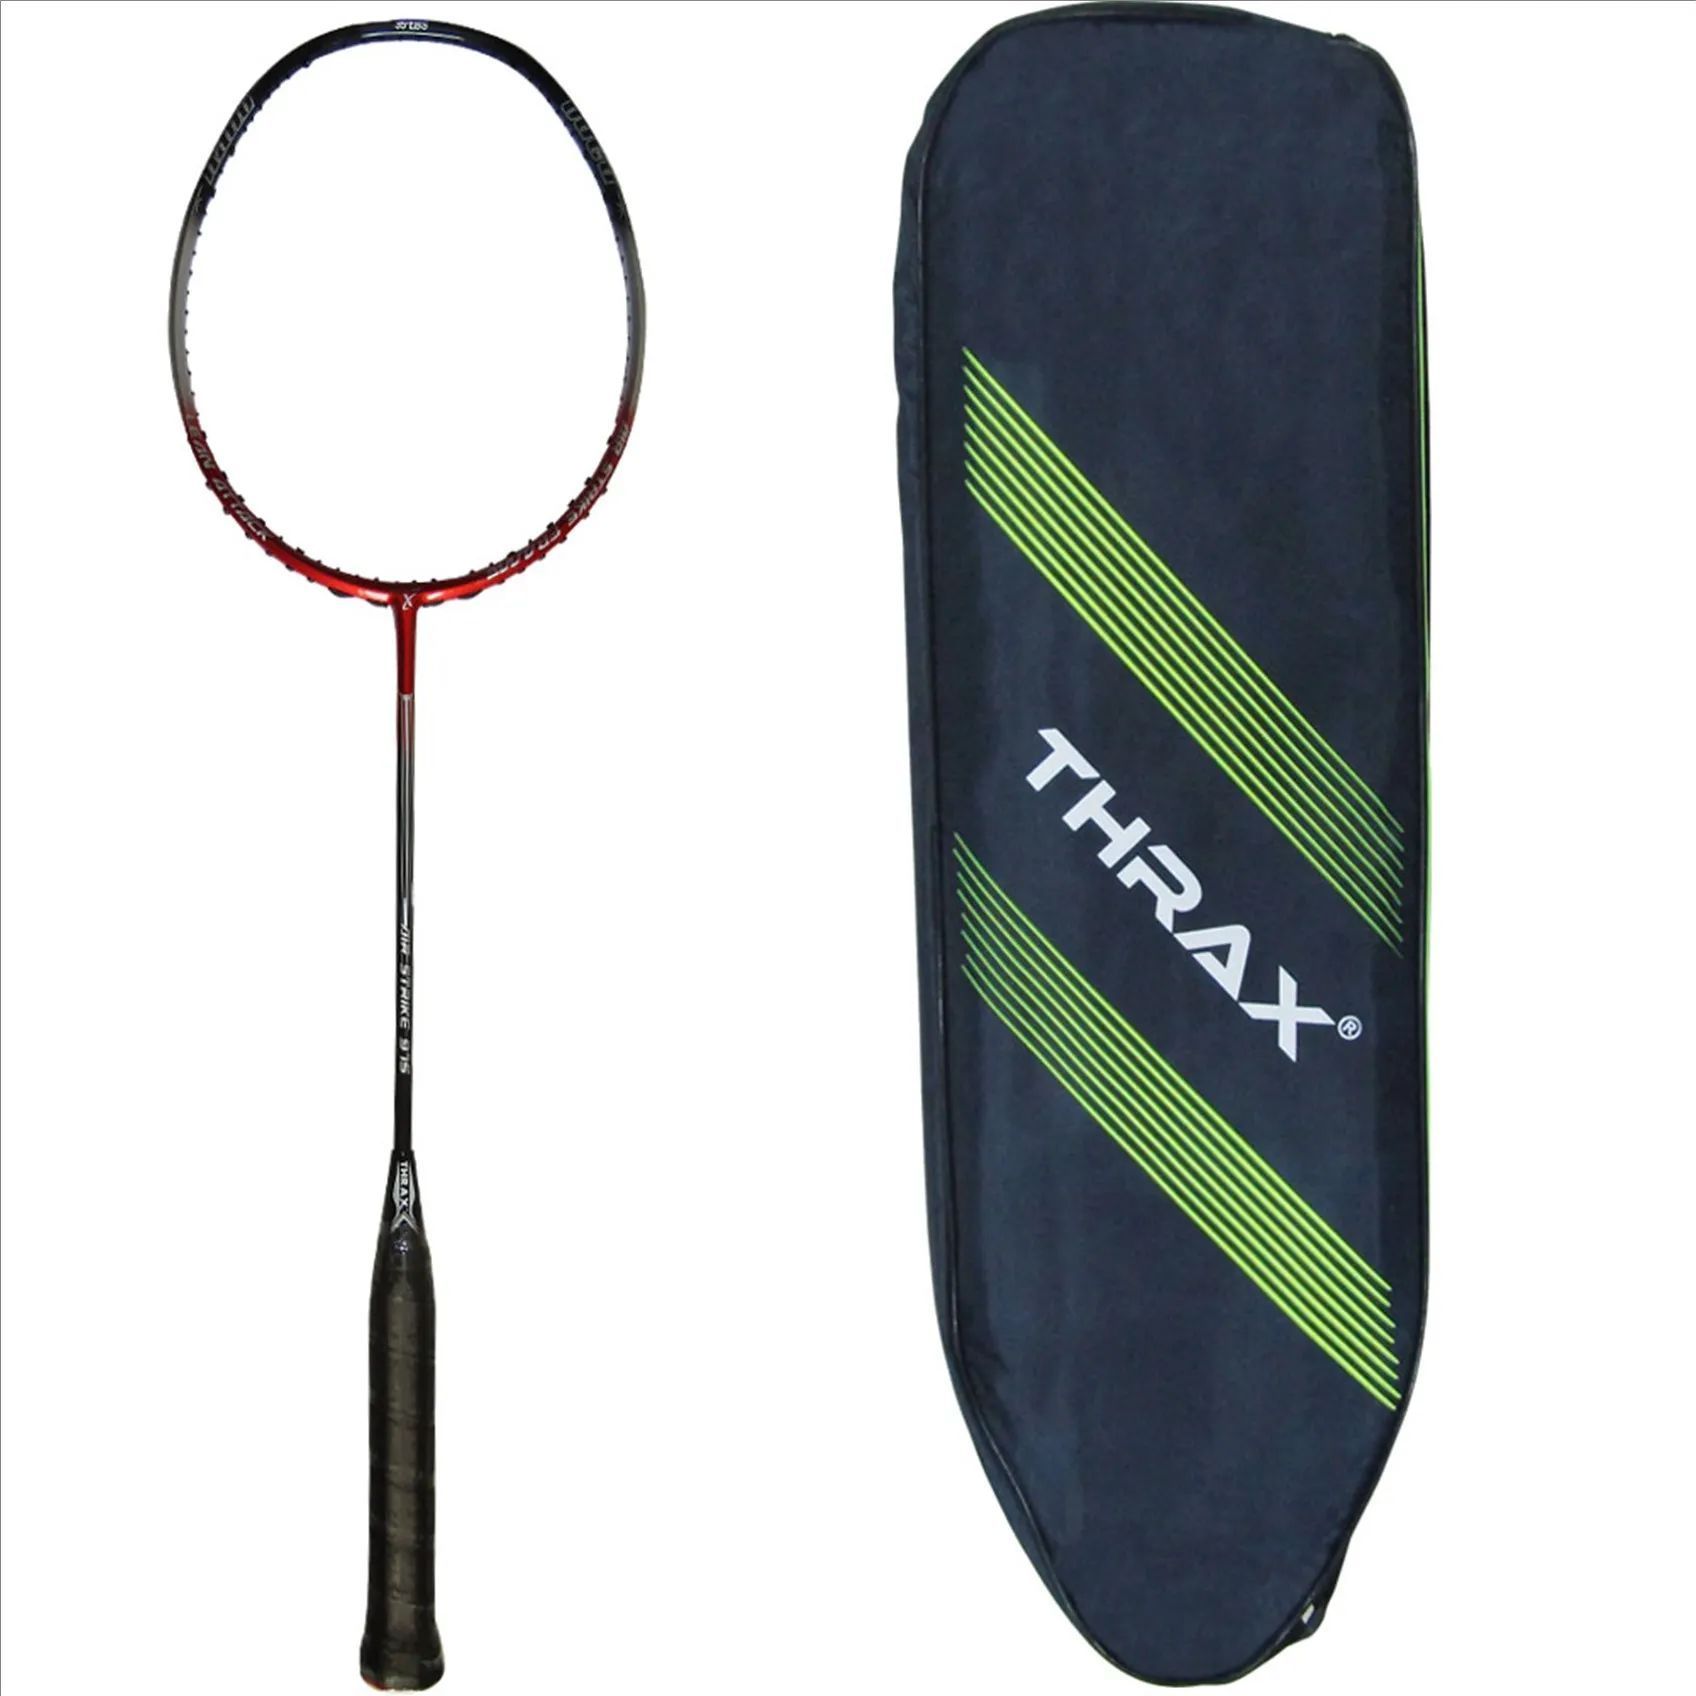 Thrax Air Strike 975 Lite 75 Gms weight 35 Lbs Tension Unstrung Badminton Racket,- Buy Thrax Air Strike 975 Lite 75 Gms weight 35 Lbs Tension Unstrung Badminton Racket Online at Lowest Prices in India